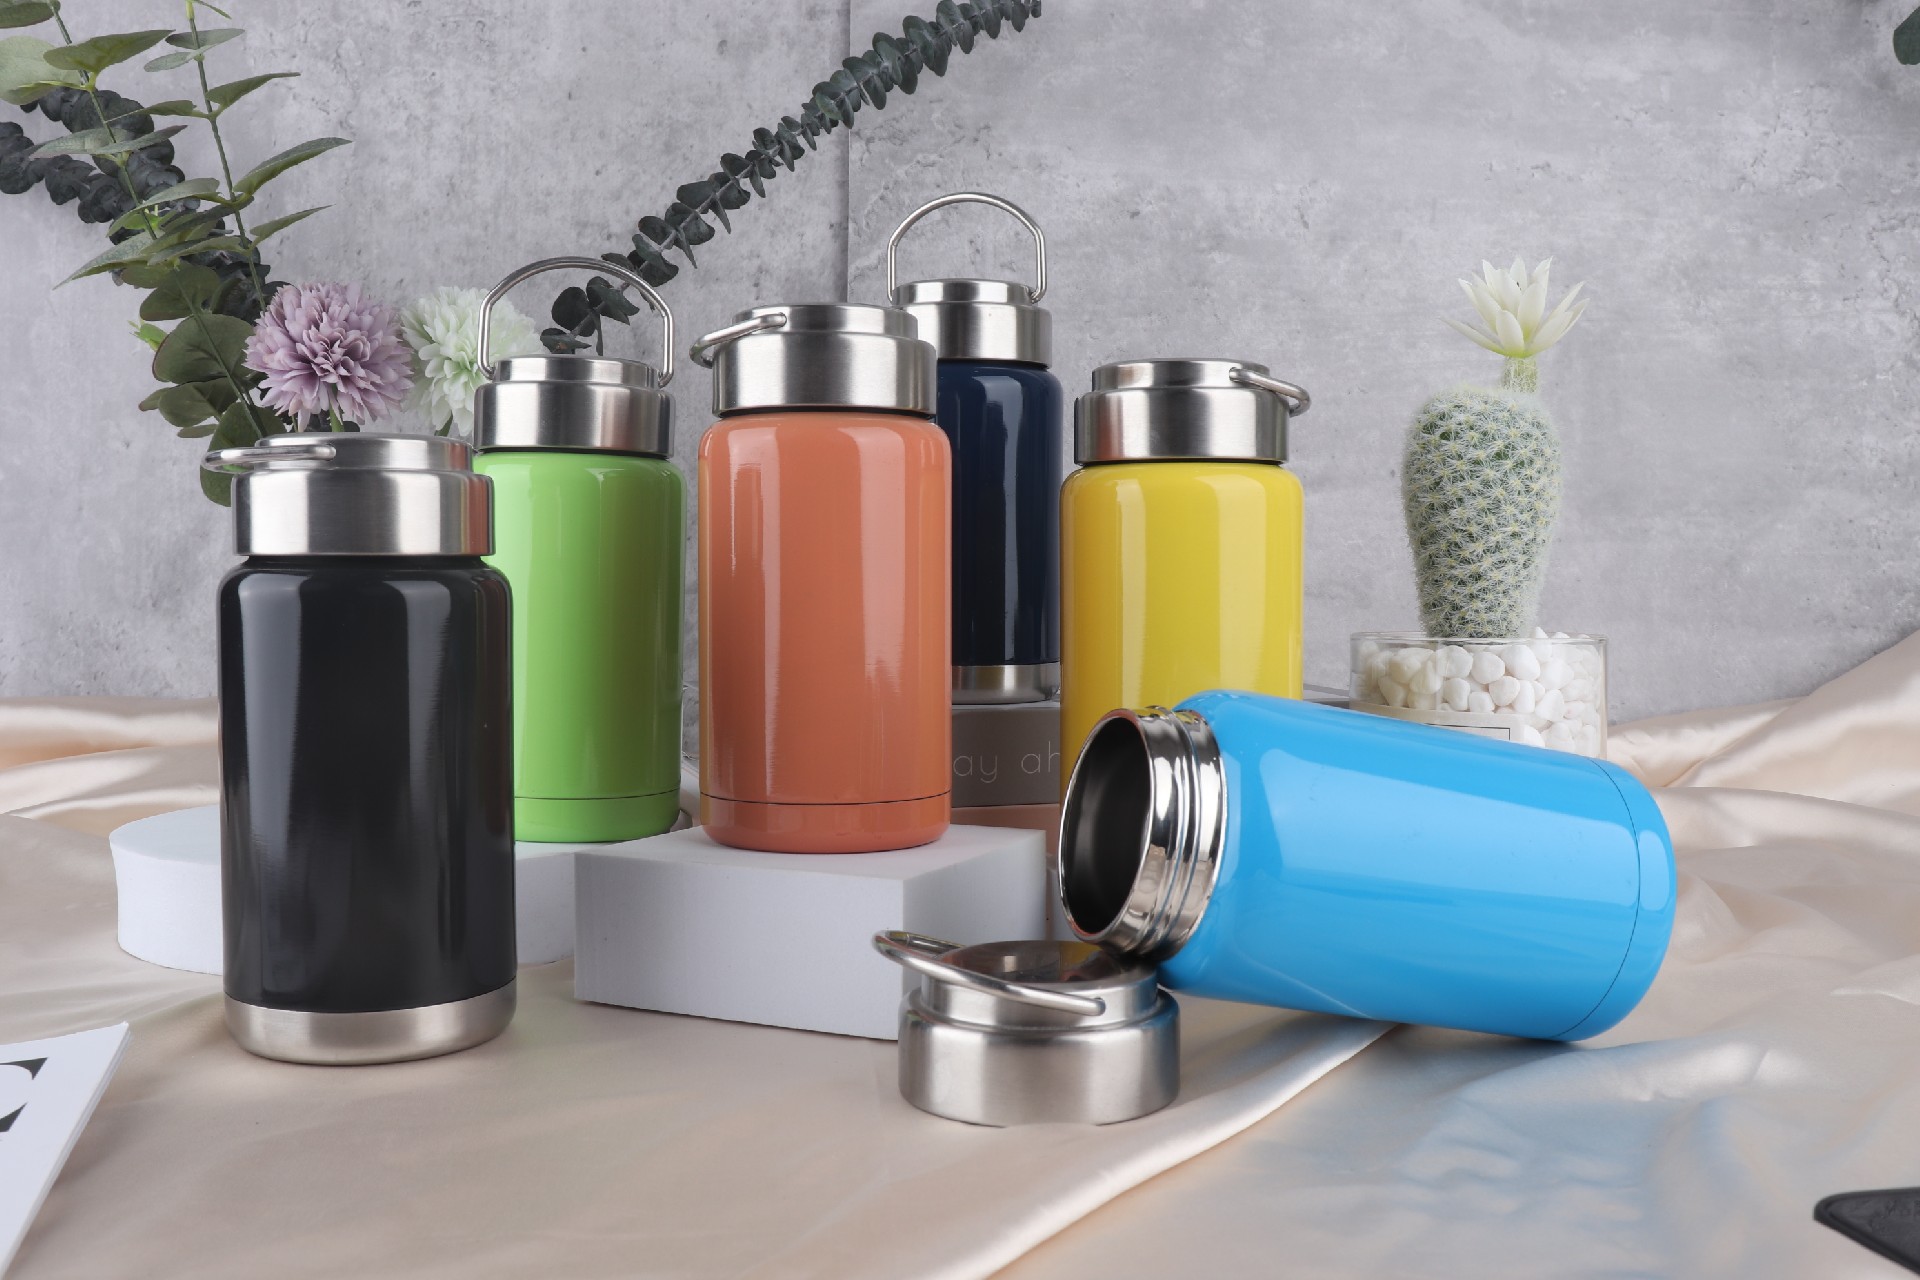 SEN HUA Best Seller Travel Promotional Eco Friendly Stainless Steel Double Wall Insulated Vacuum Bottle With Cap Water Bottles